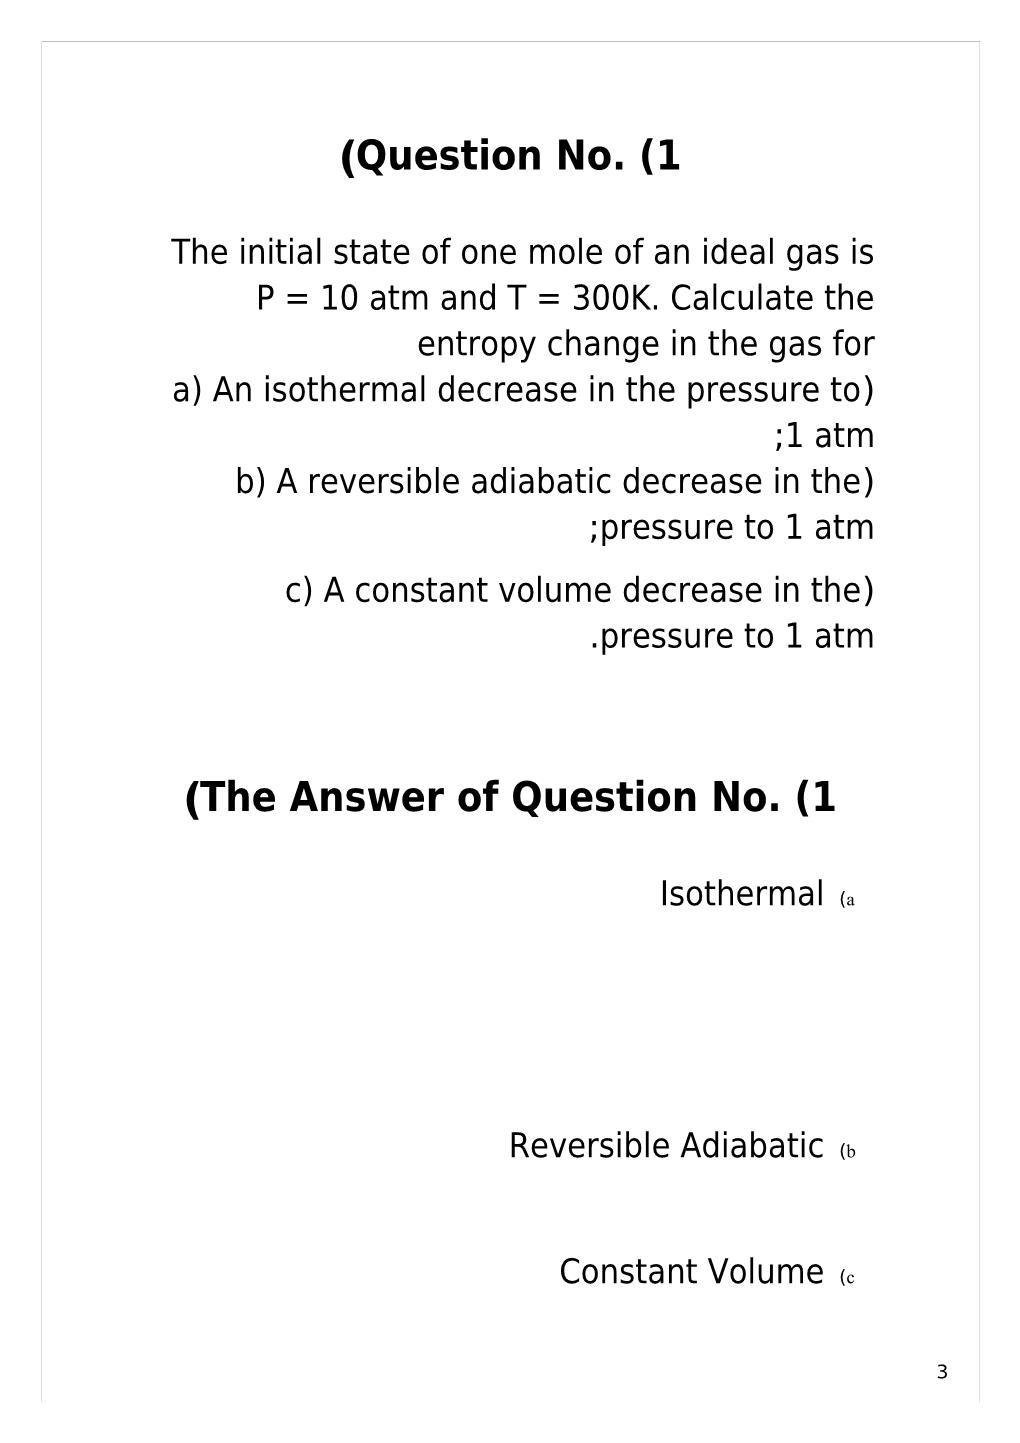 (A) an Isothermal Decrease in the Pressure to 1 Atm;